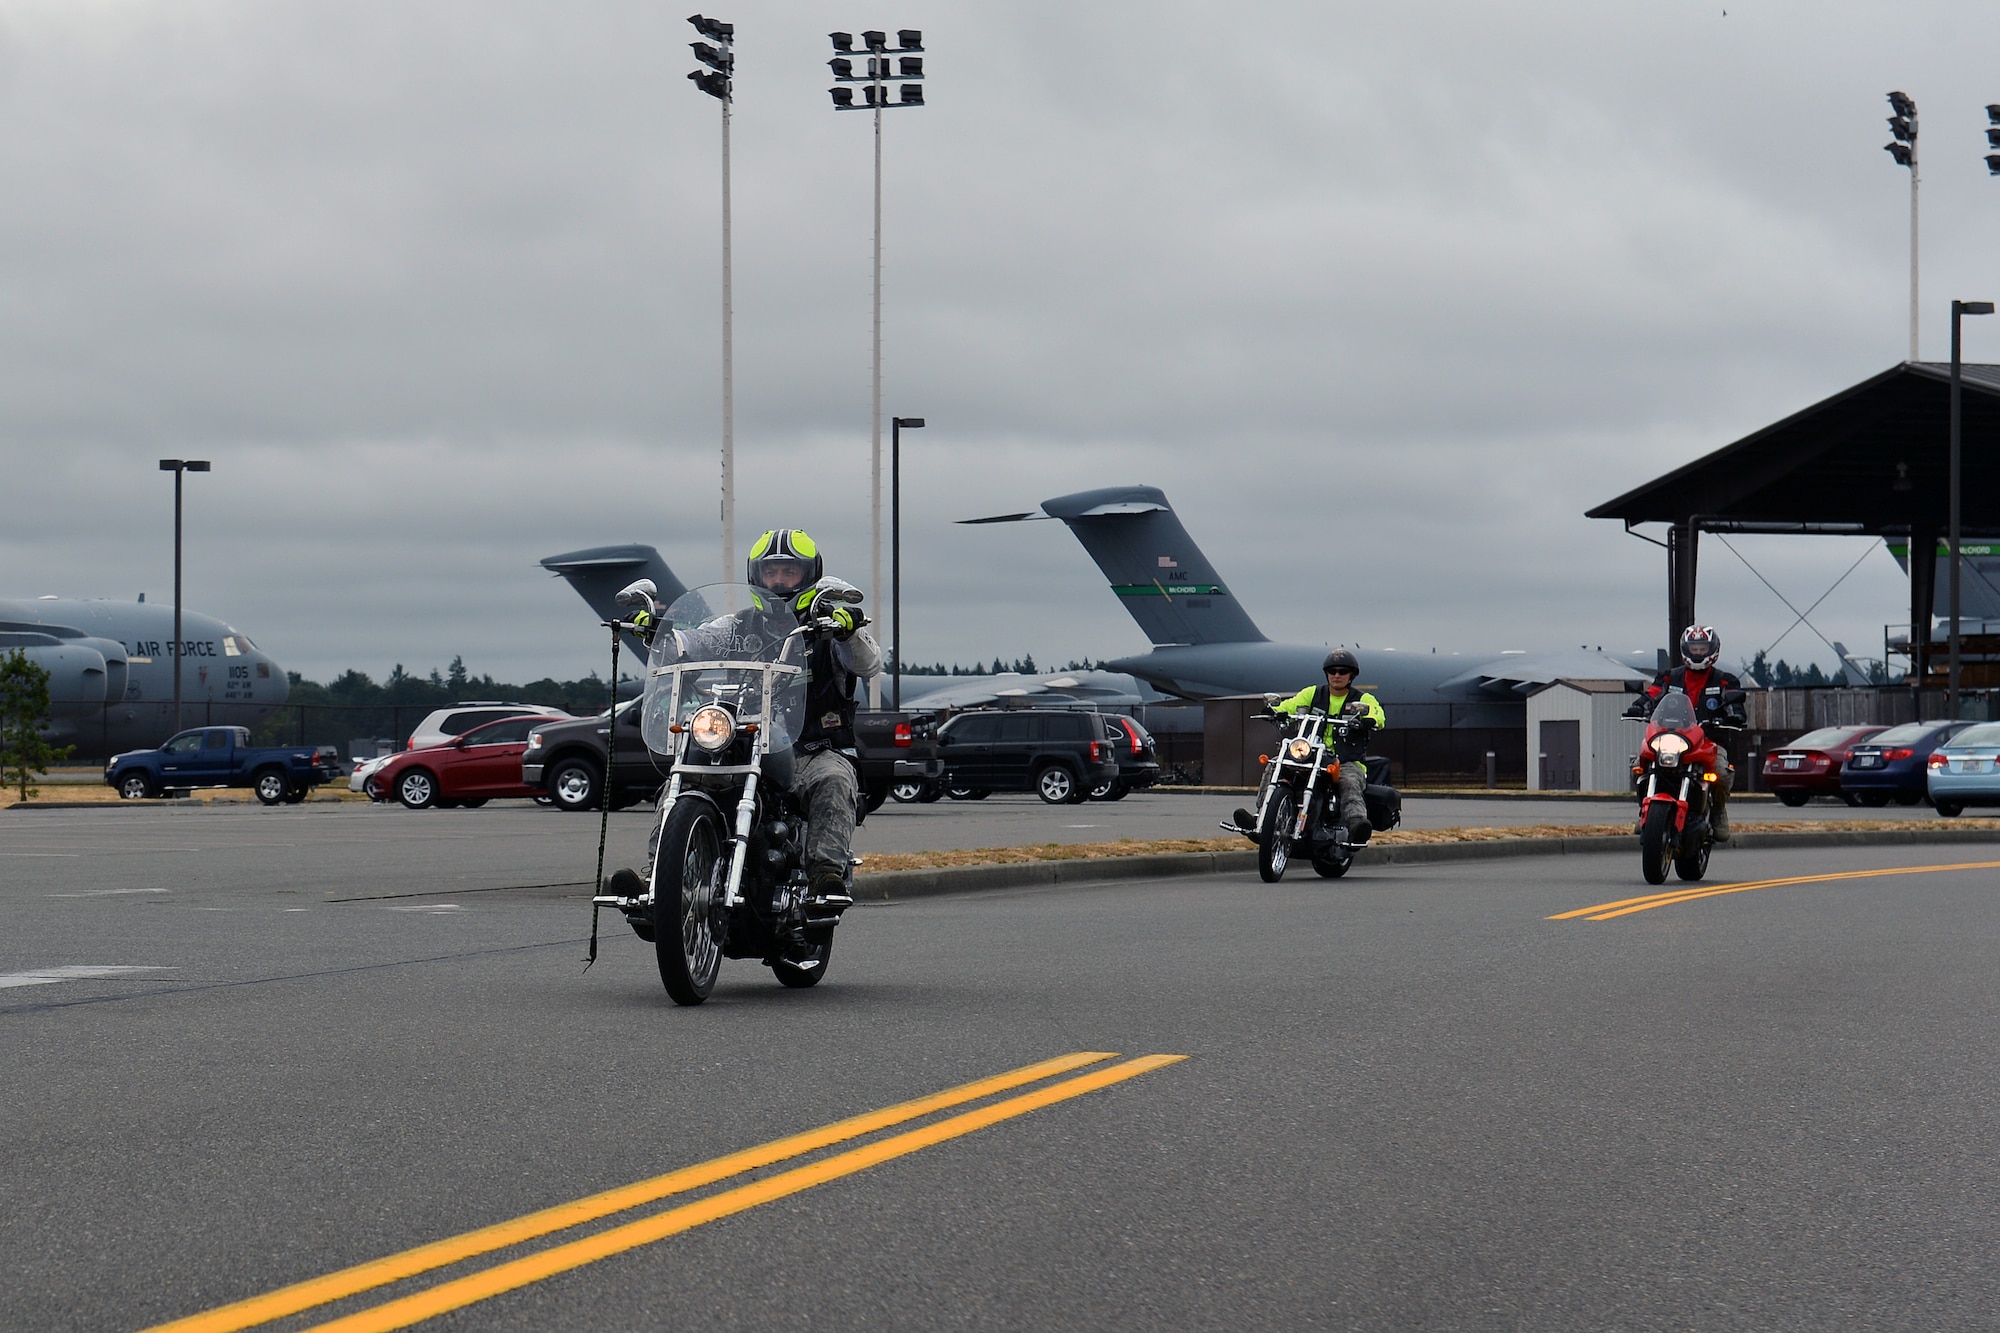 Airmen from the Green Knights Military Motorcycle Club Chapter 3 ride as a group Aug. 1, 2013 at Joint Base Lewis-McChord, Wash. Since 2012, the group has helped support and raise money for organizations like “Bikers Against Statewide Hunger” and “Toys for Tots” through group rides. (U.S. Air Force photo/Airman 1st Class Jacob Jimenez)   